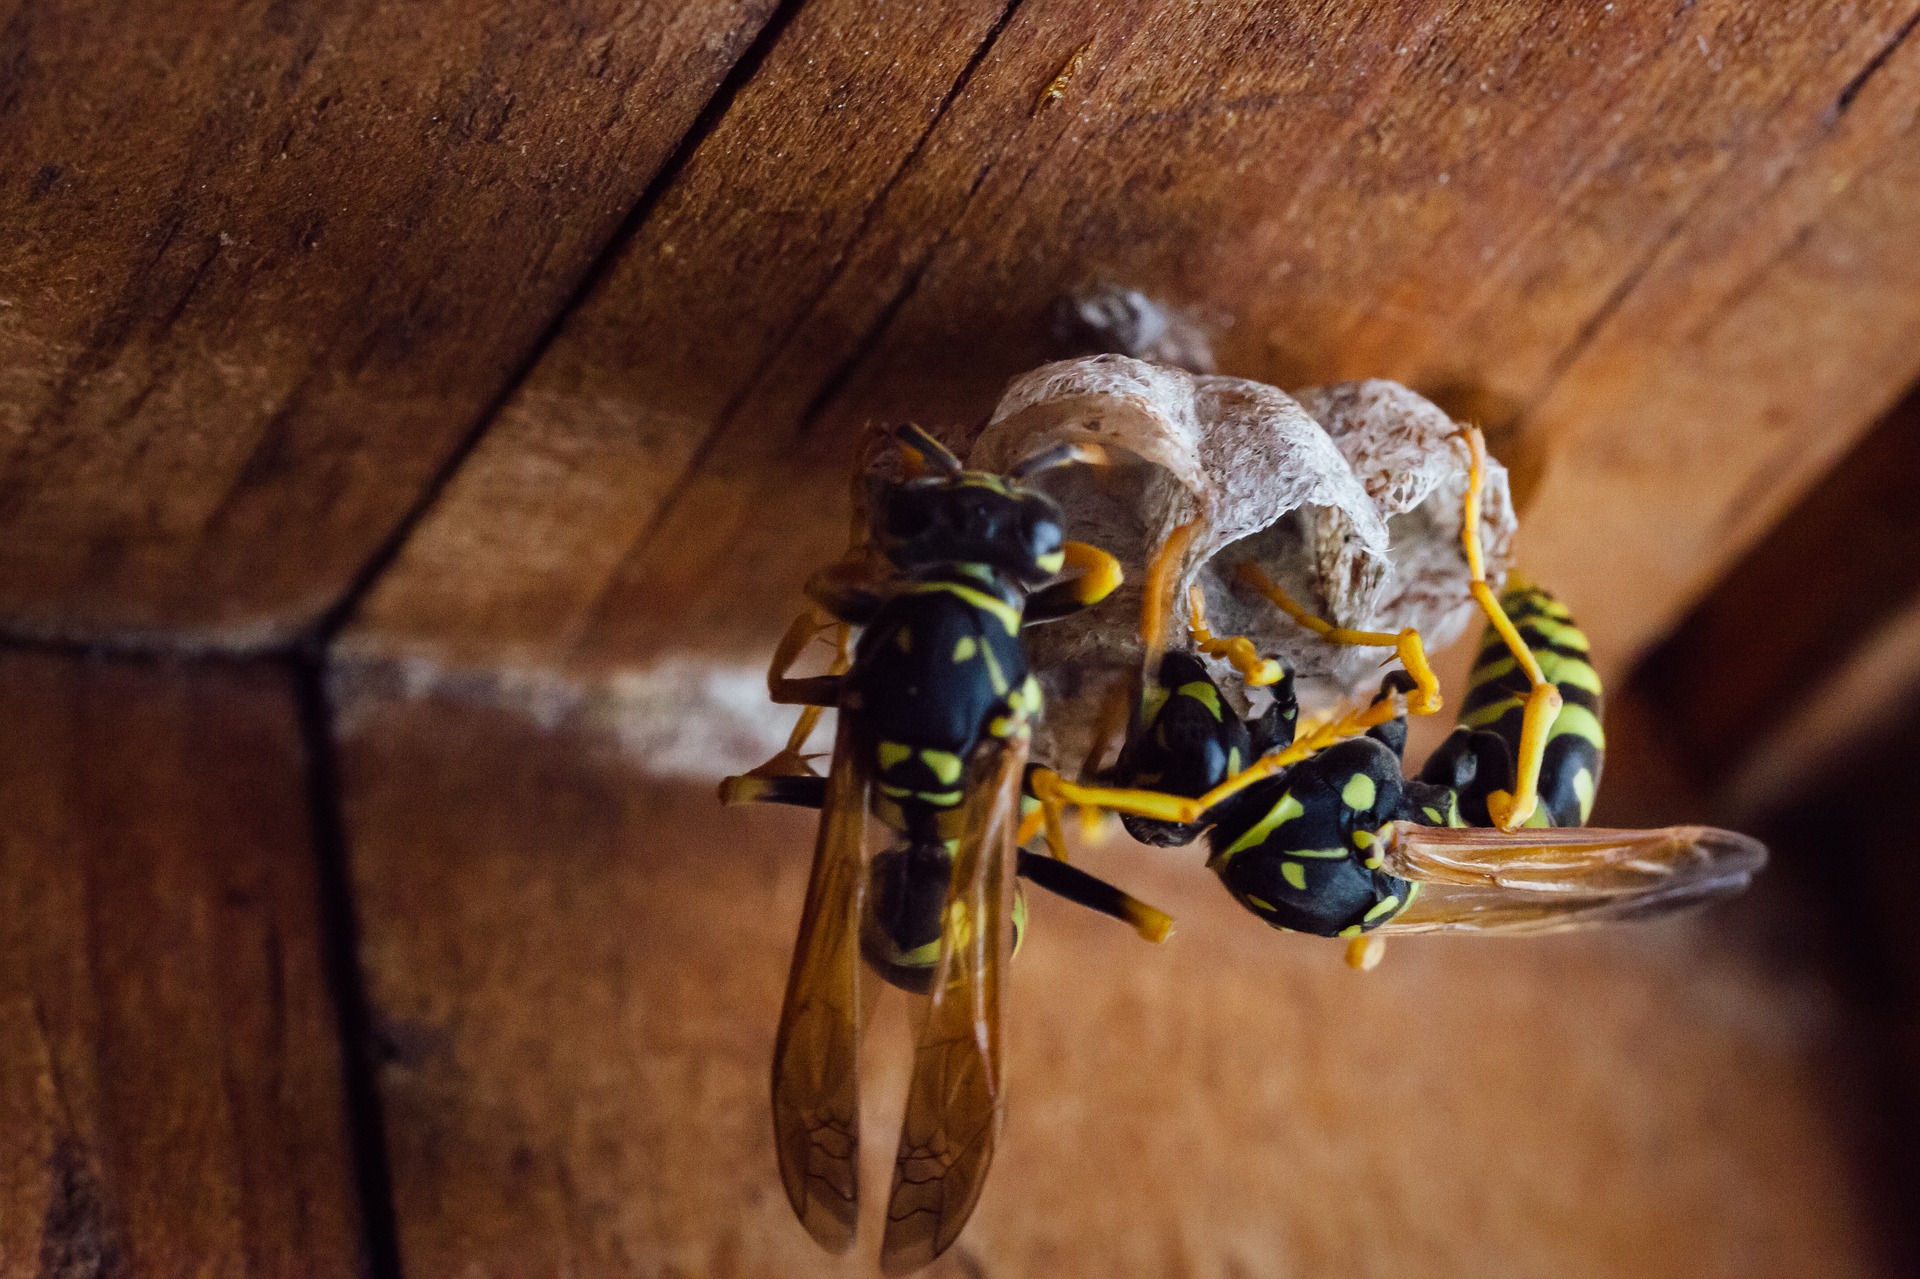 Wasps making a nest.